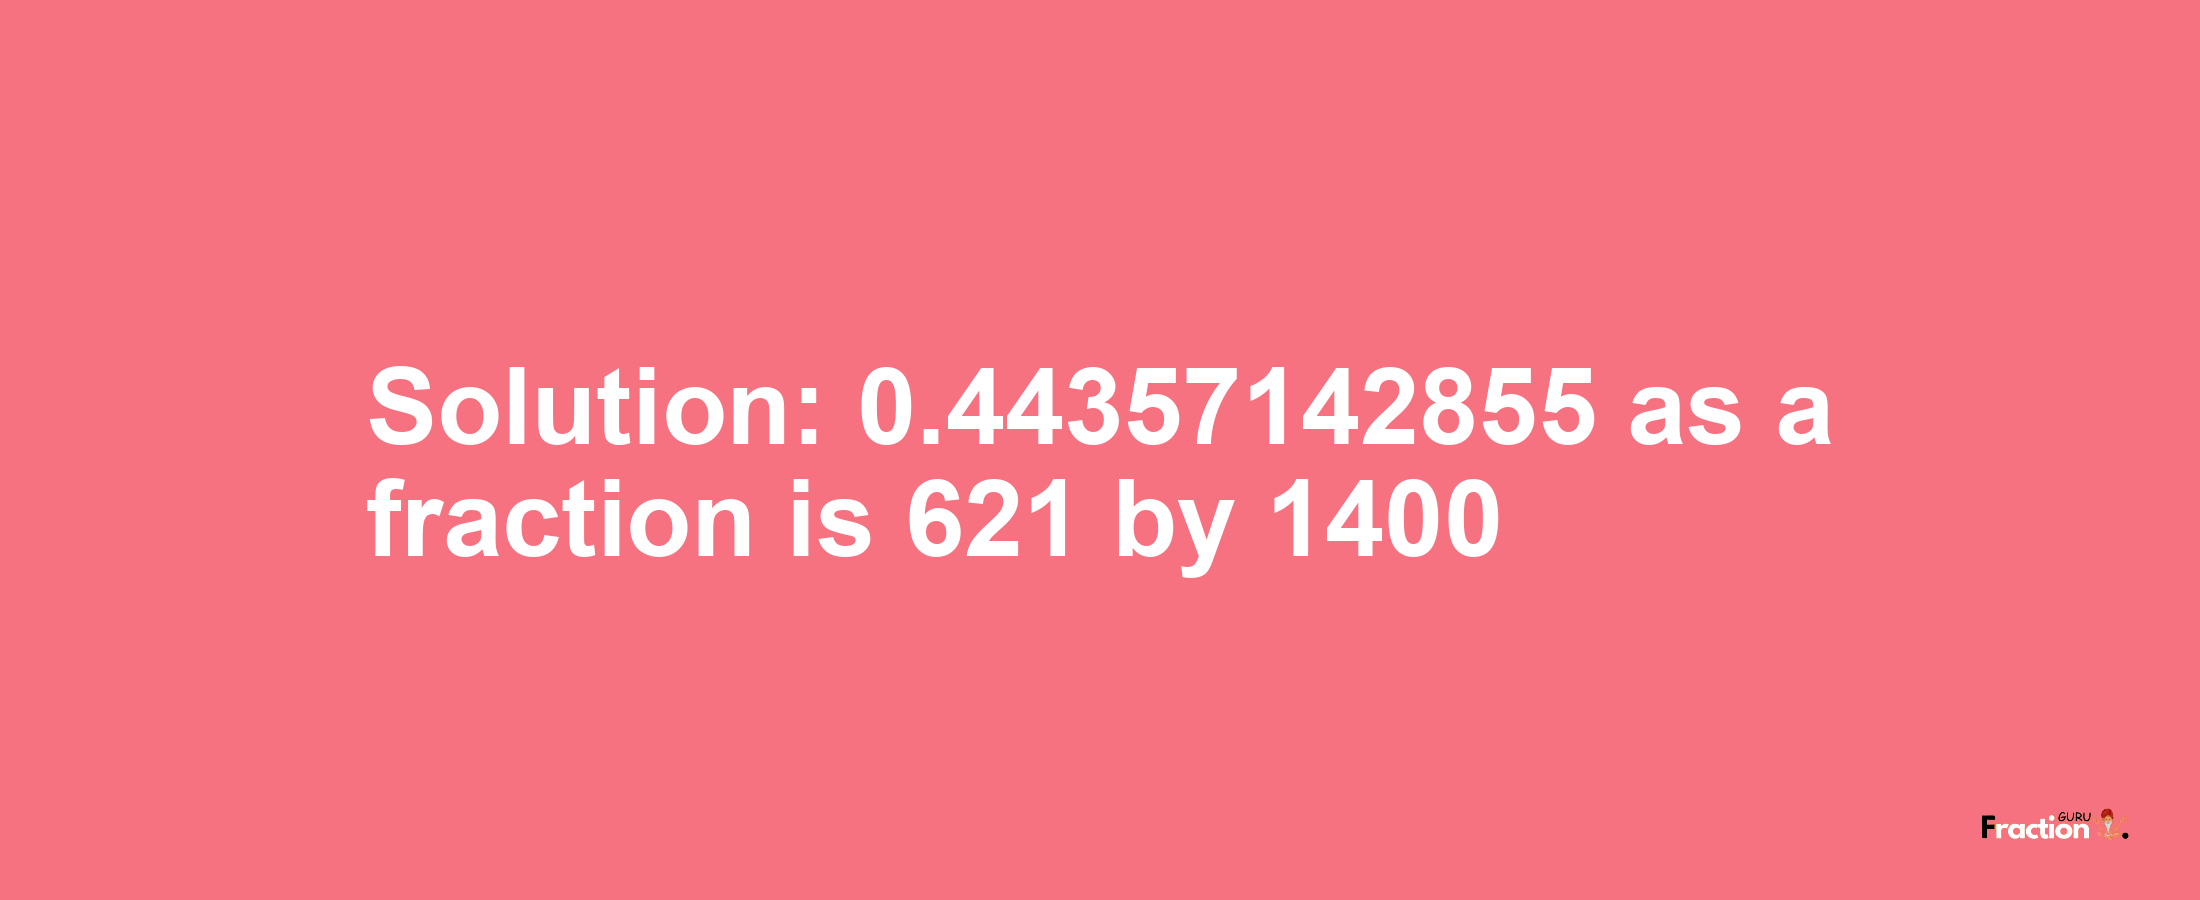 Solution:0.44357142855 as a fraction is 621/1400